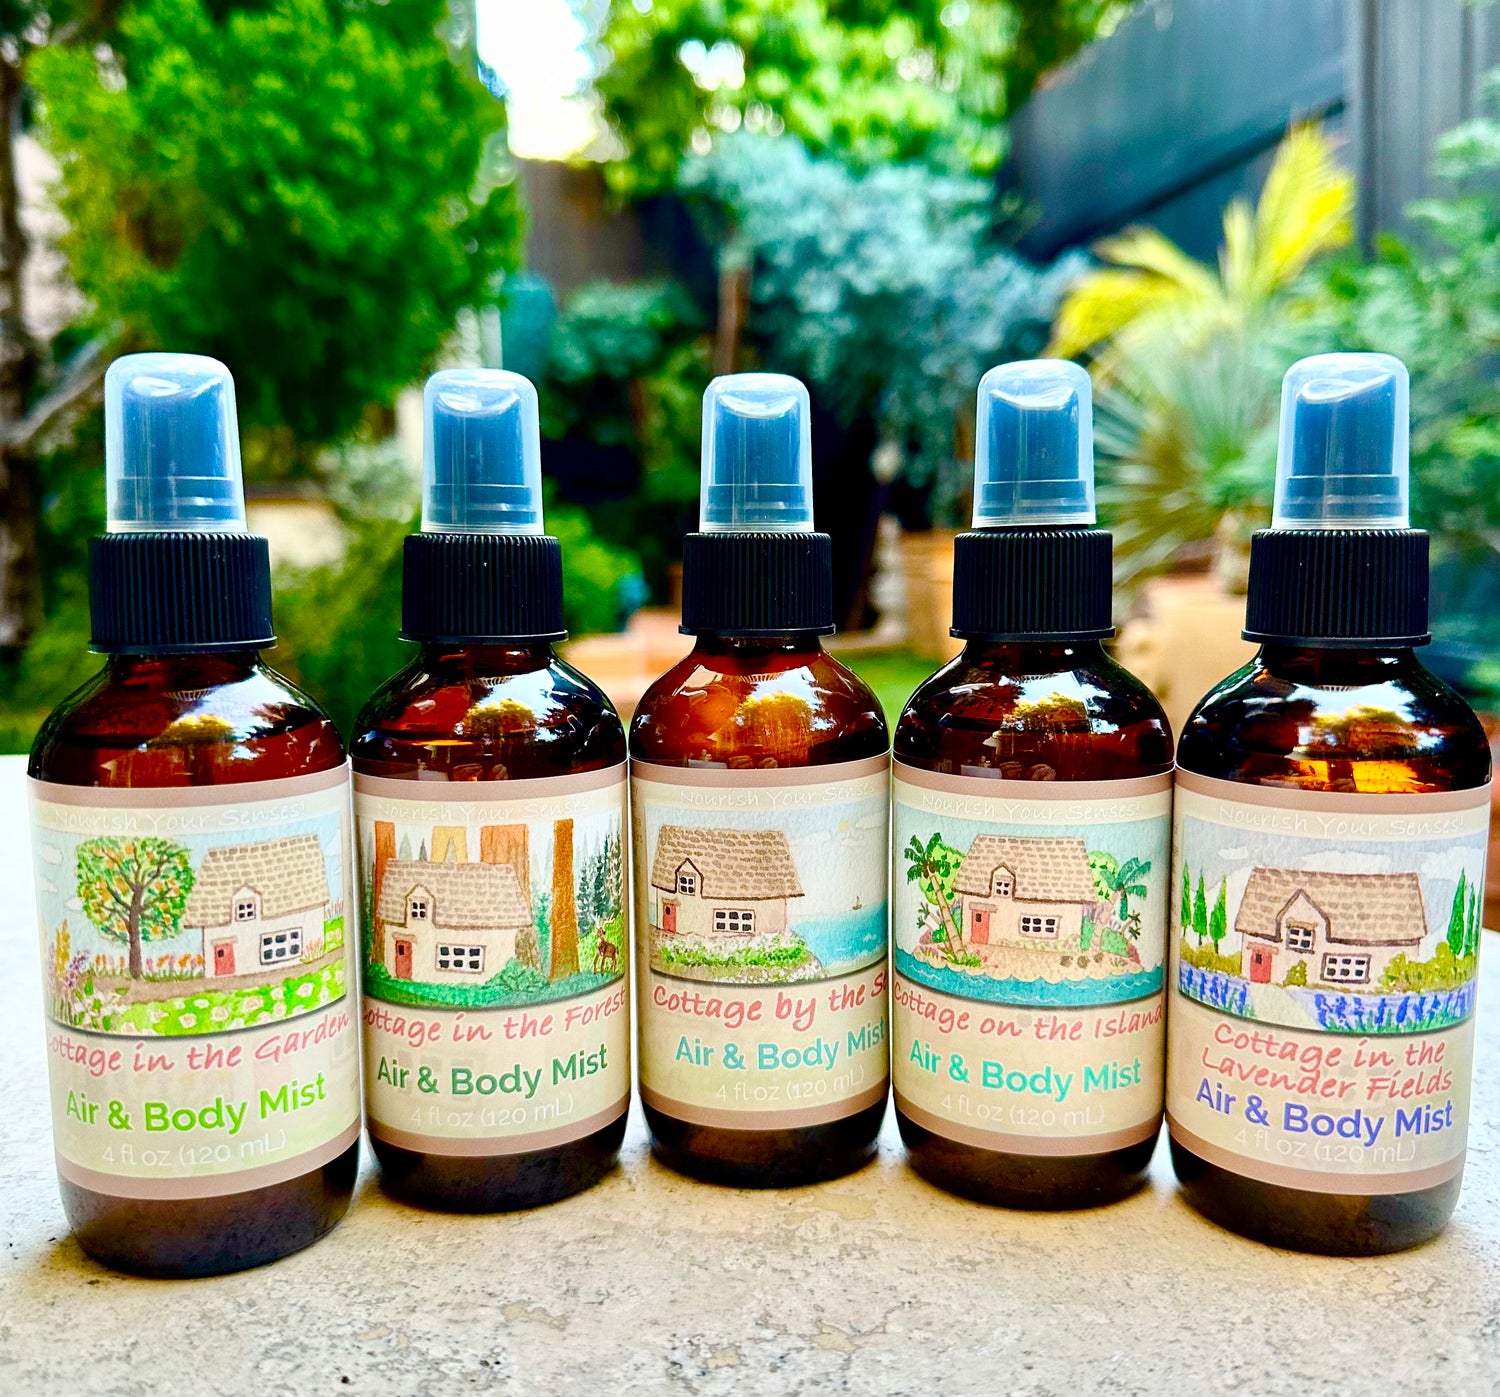 Cottage Comfy Air & Body Mists